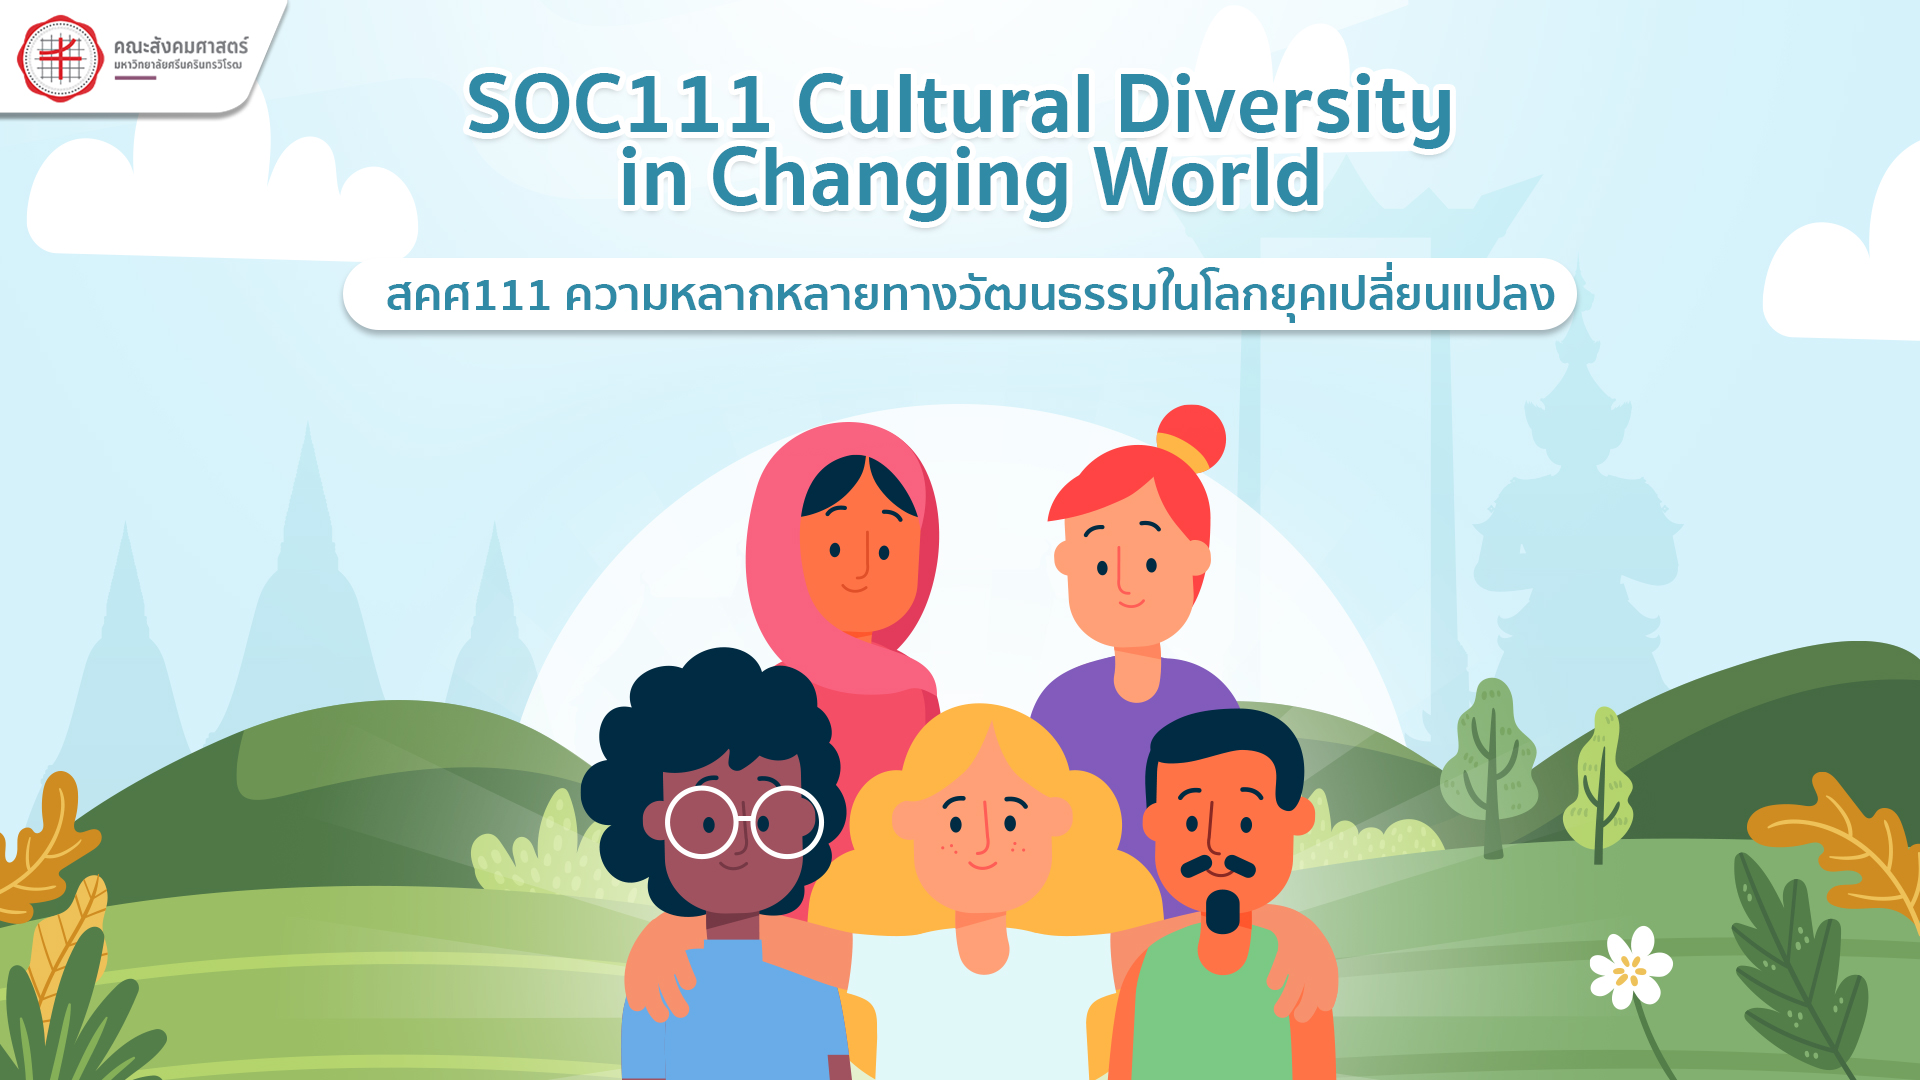 SOC111 Cultural Diversity in Changing World